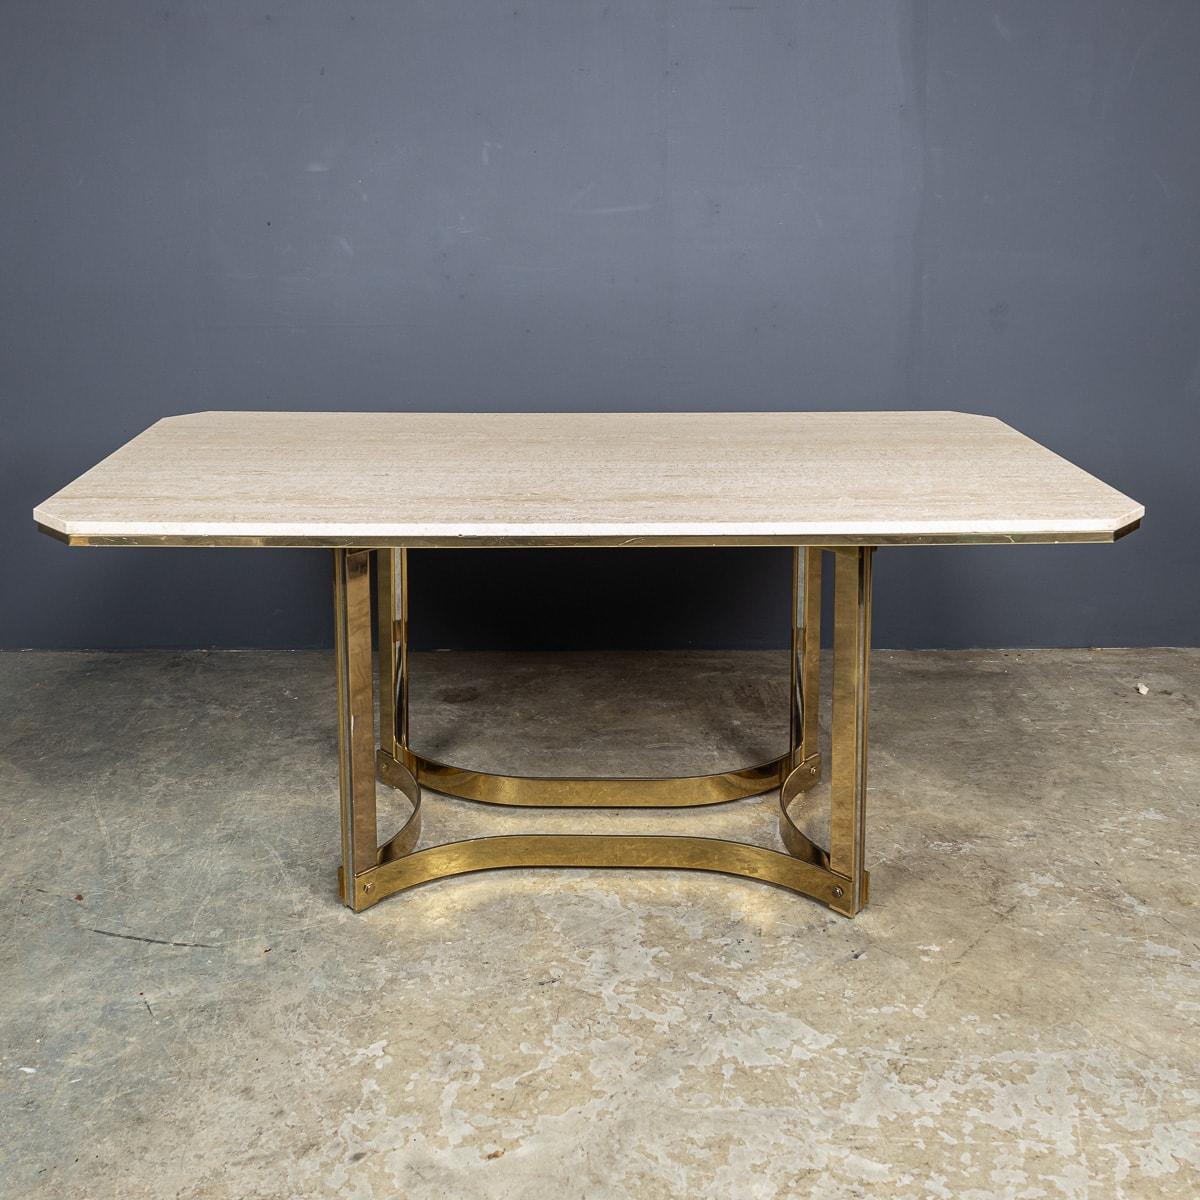 A vintage mid-20th Century dining table envisioned by the renowned designer Alessandro Albrizzi. Crafted in a grand elongated octagonal shape from travertine, it boasts a luxurious gold-plated border and base, adding a touch of opulence to any